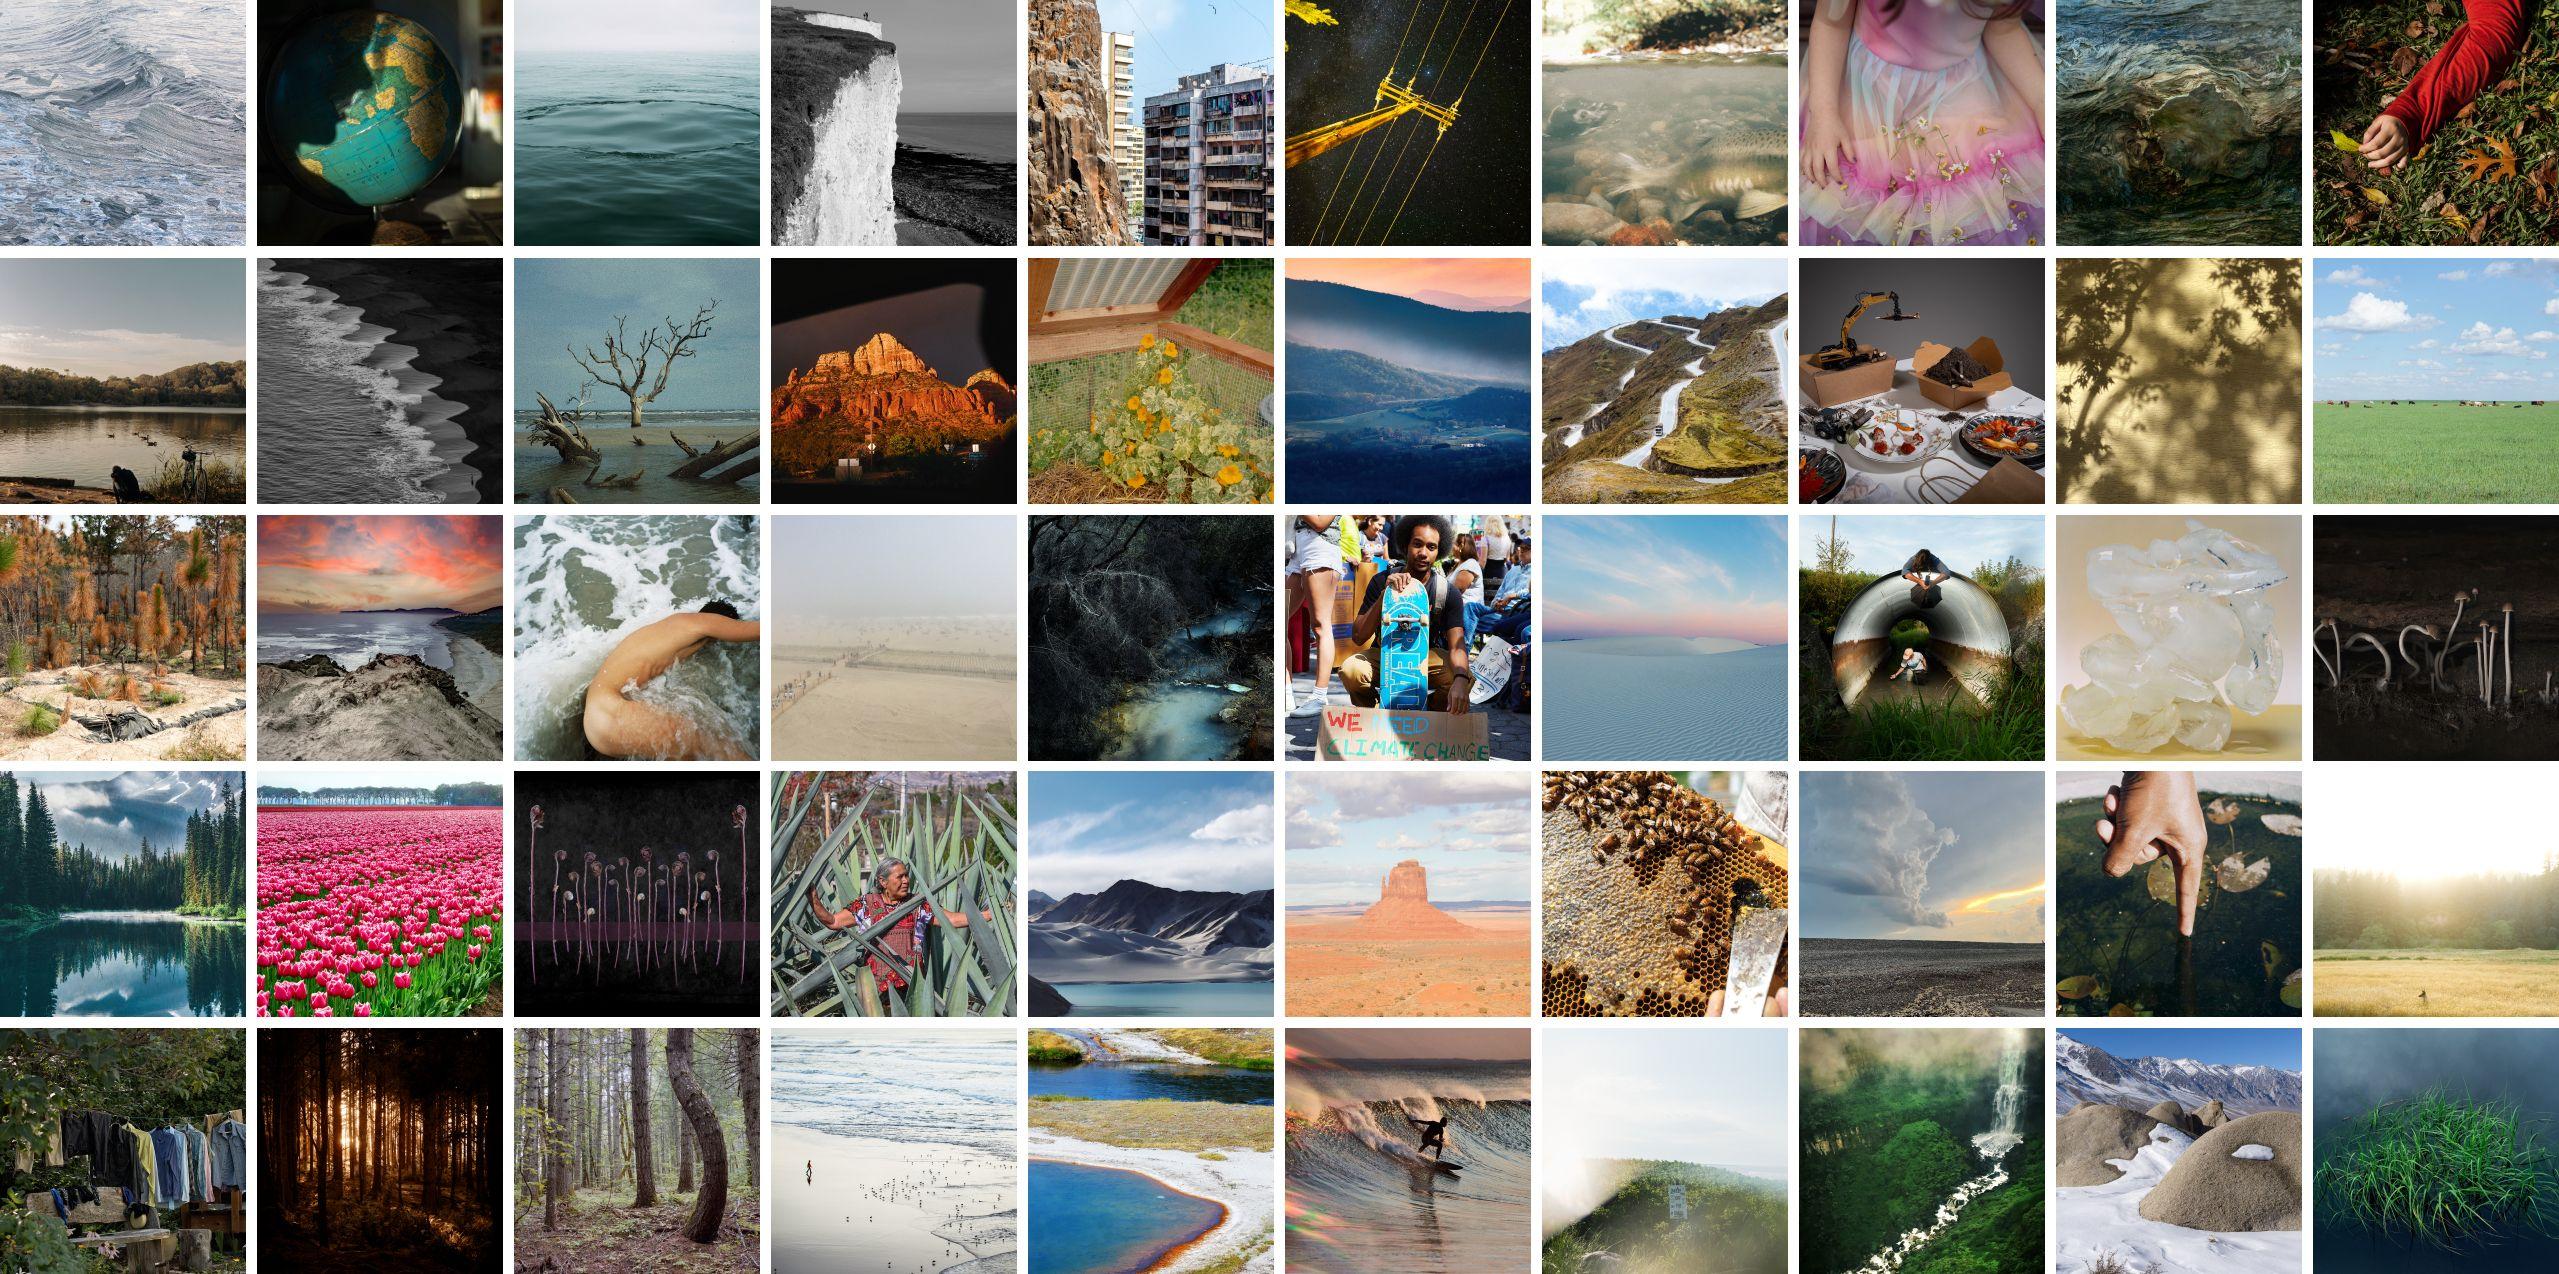 54 Photos (and a GIF) That Celebrate Our Glorious Earth